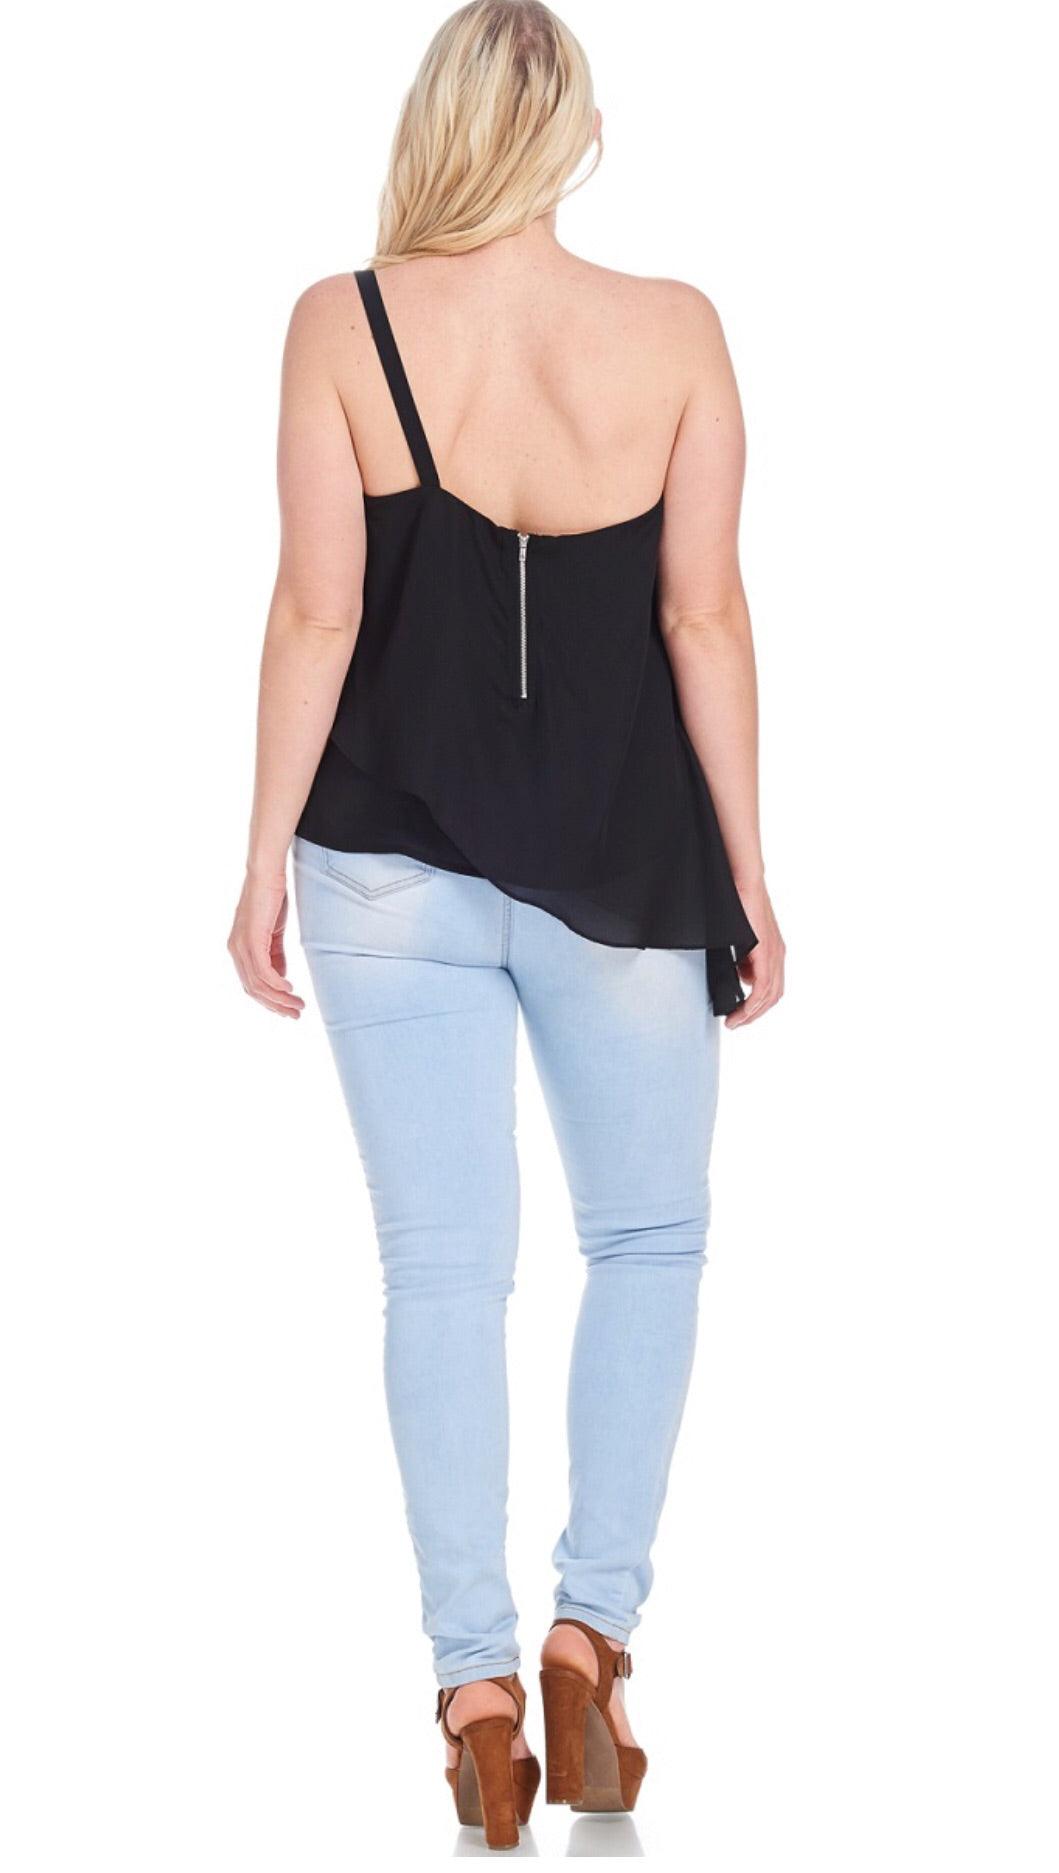 Solid Sleeveless Top - Mint Leafe Boutique 